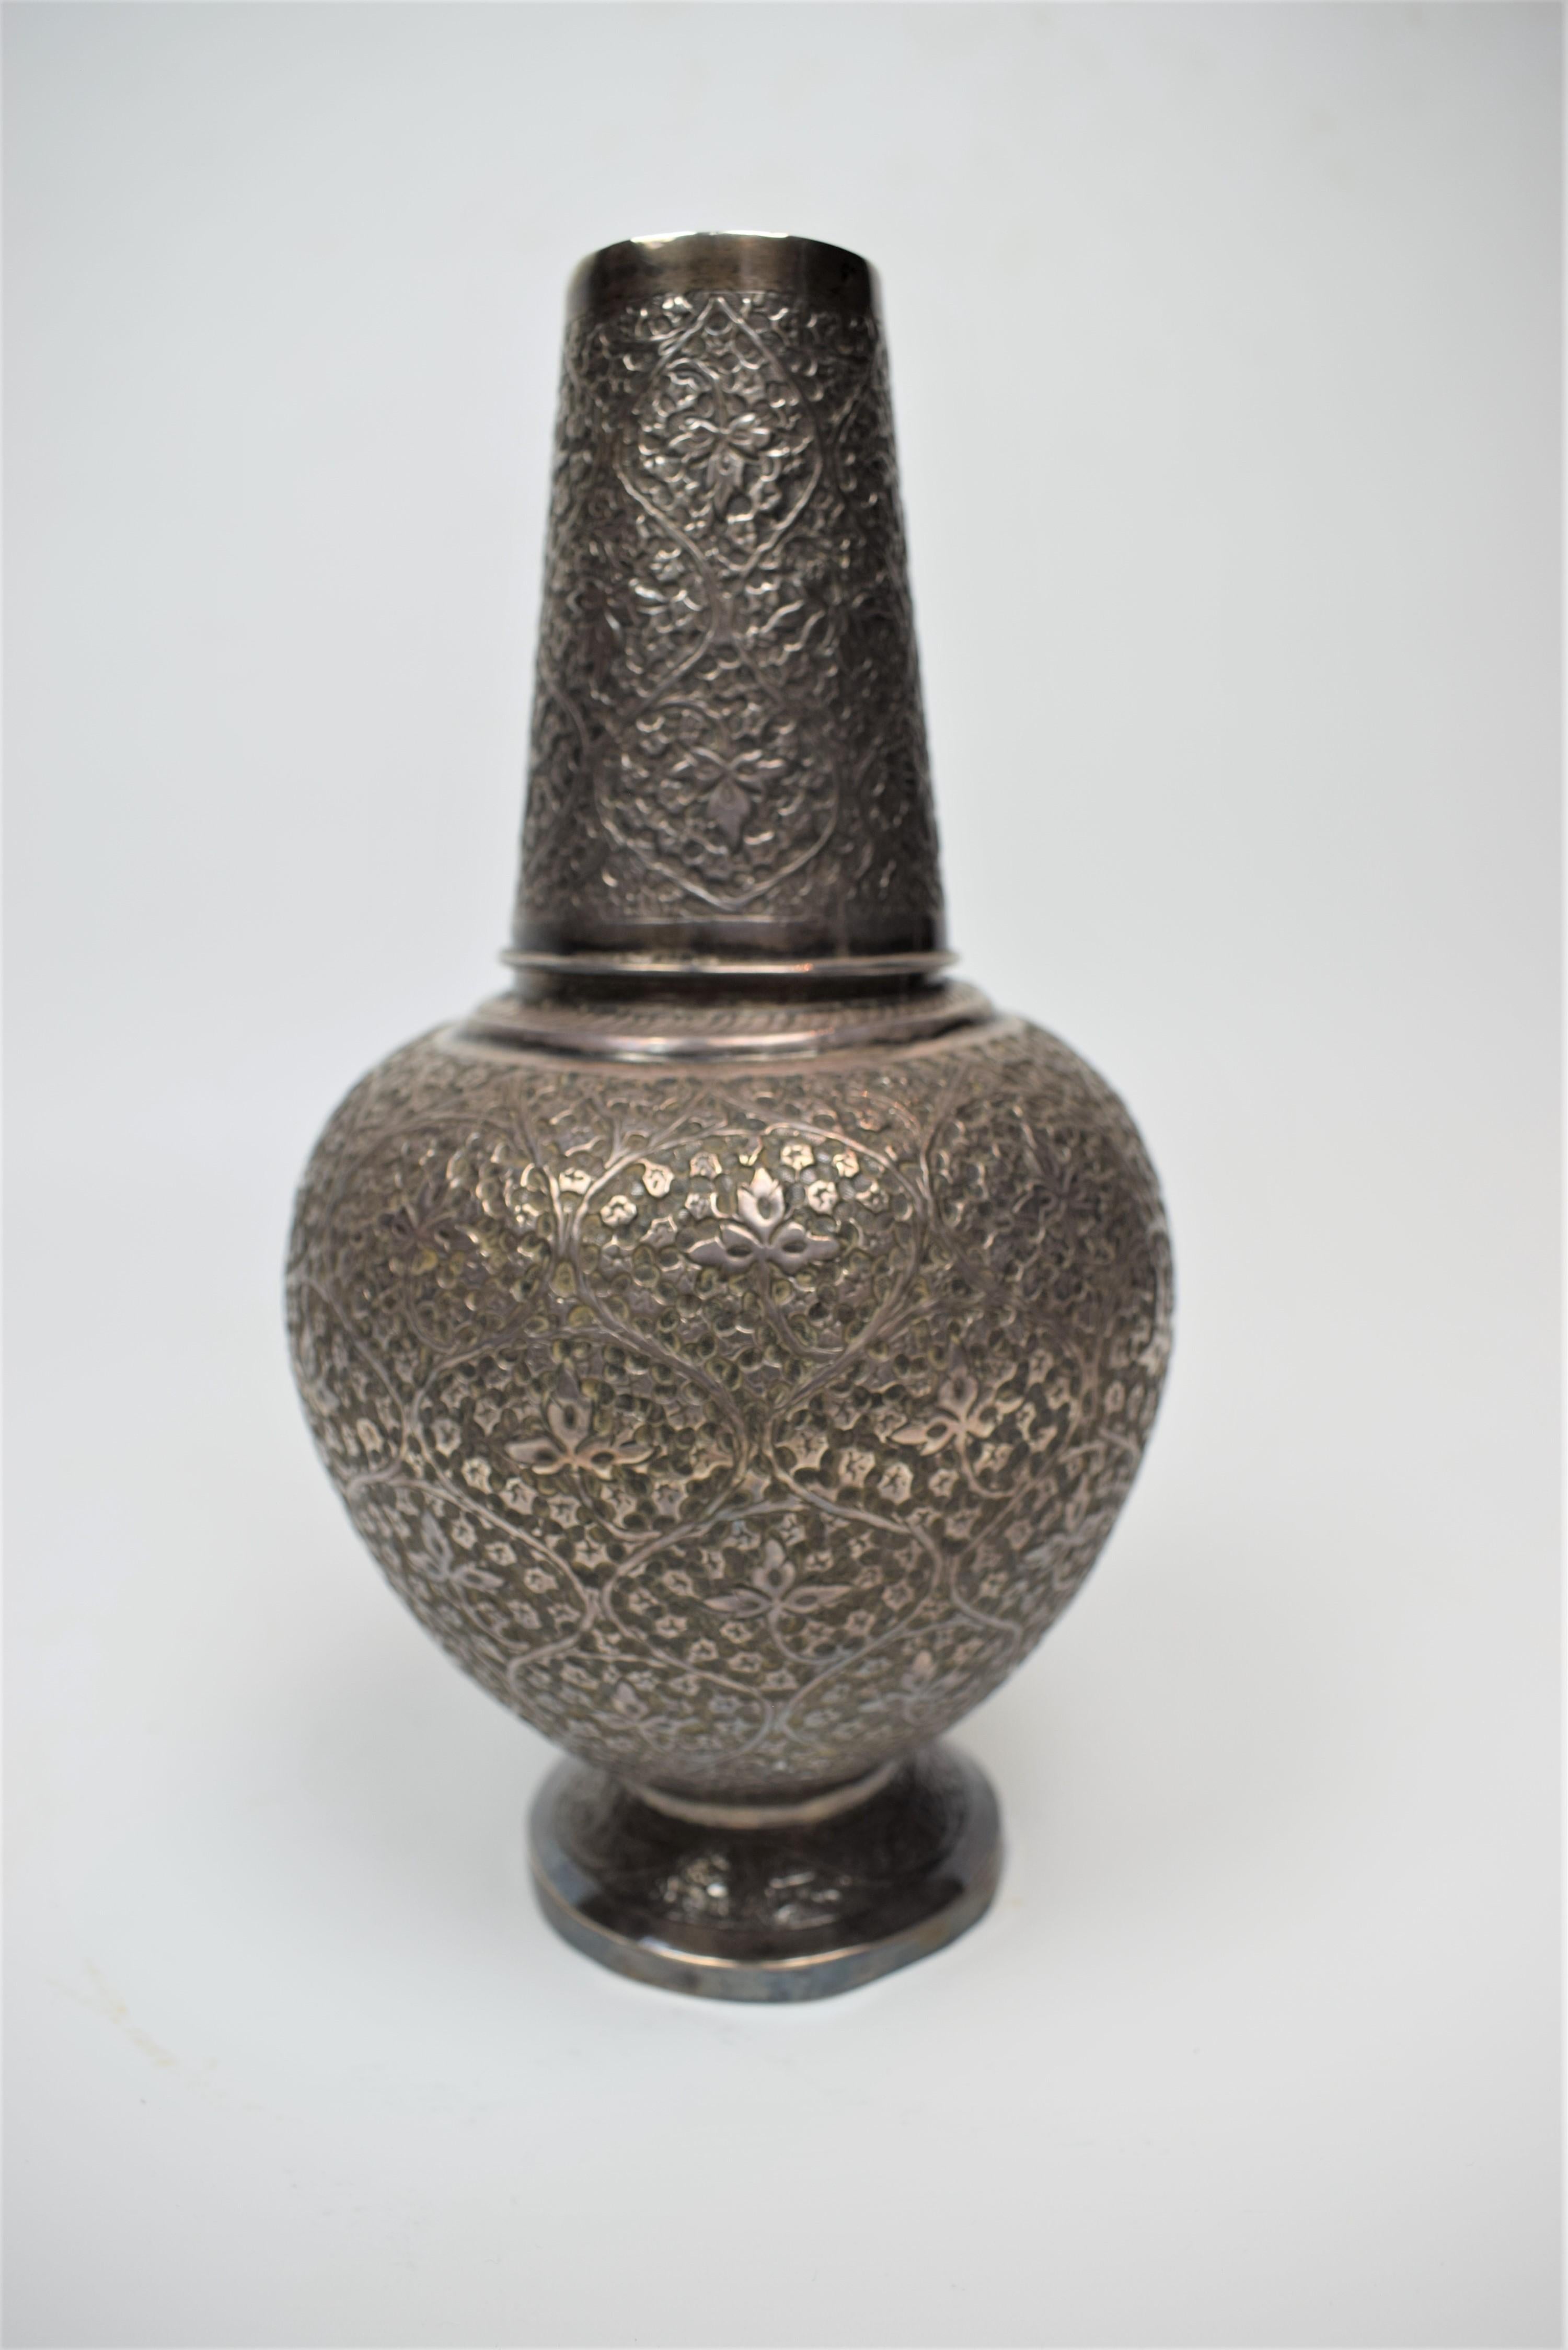 Kashmiri 92% Silver Wine Vessel and glass, Mid-19th century.

The great Mughal Empire, in its opulence, grandeur and glory has been a subject of fascination and intrigue for historians, collectors and commoners alike. Their unique styles and eye